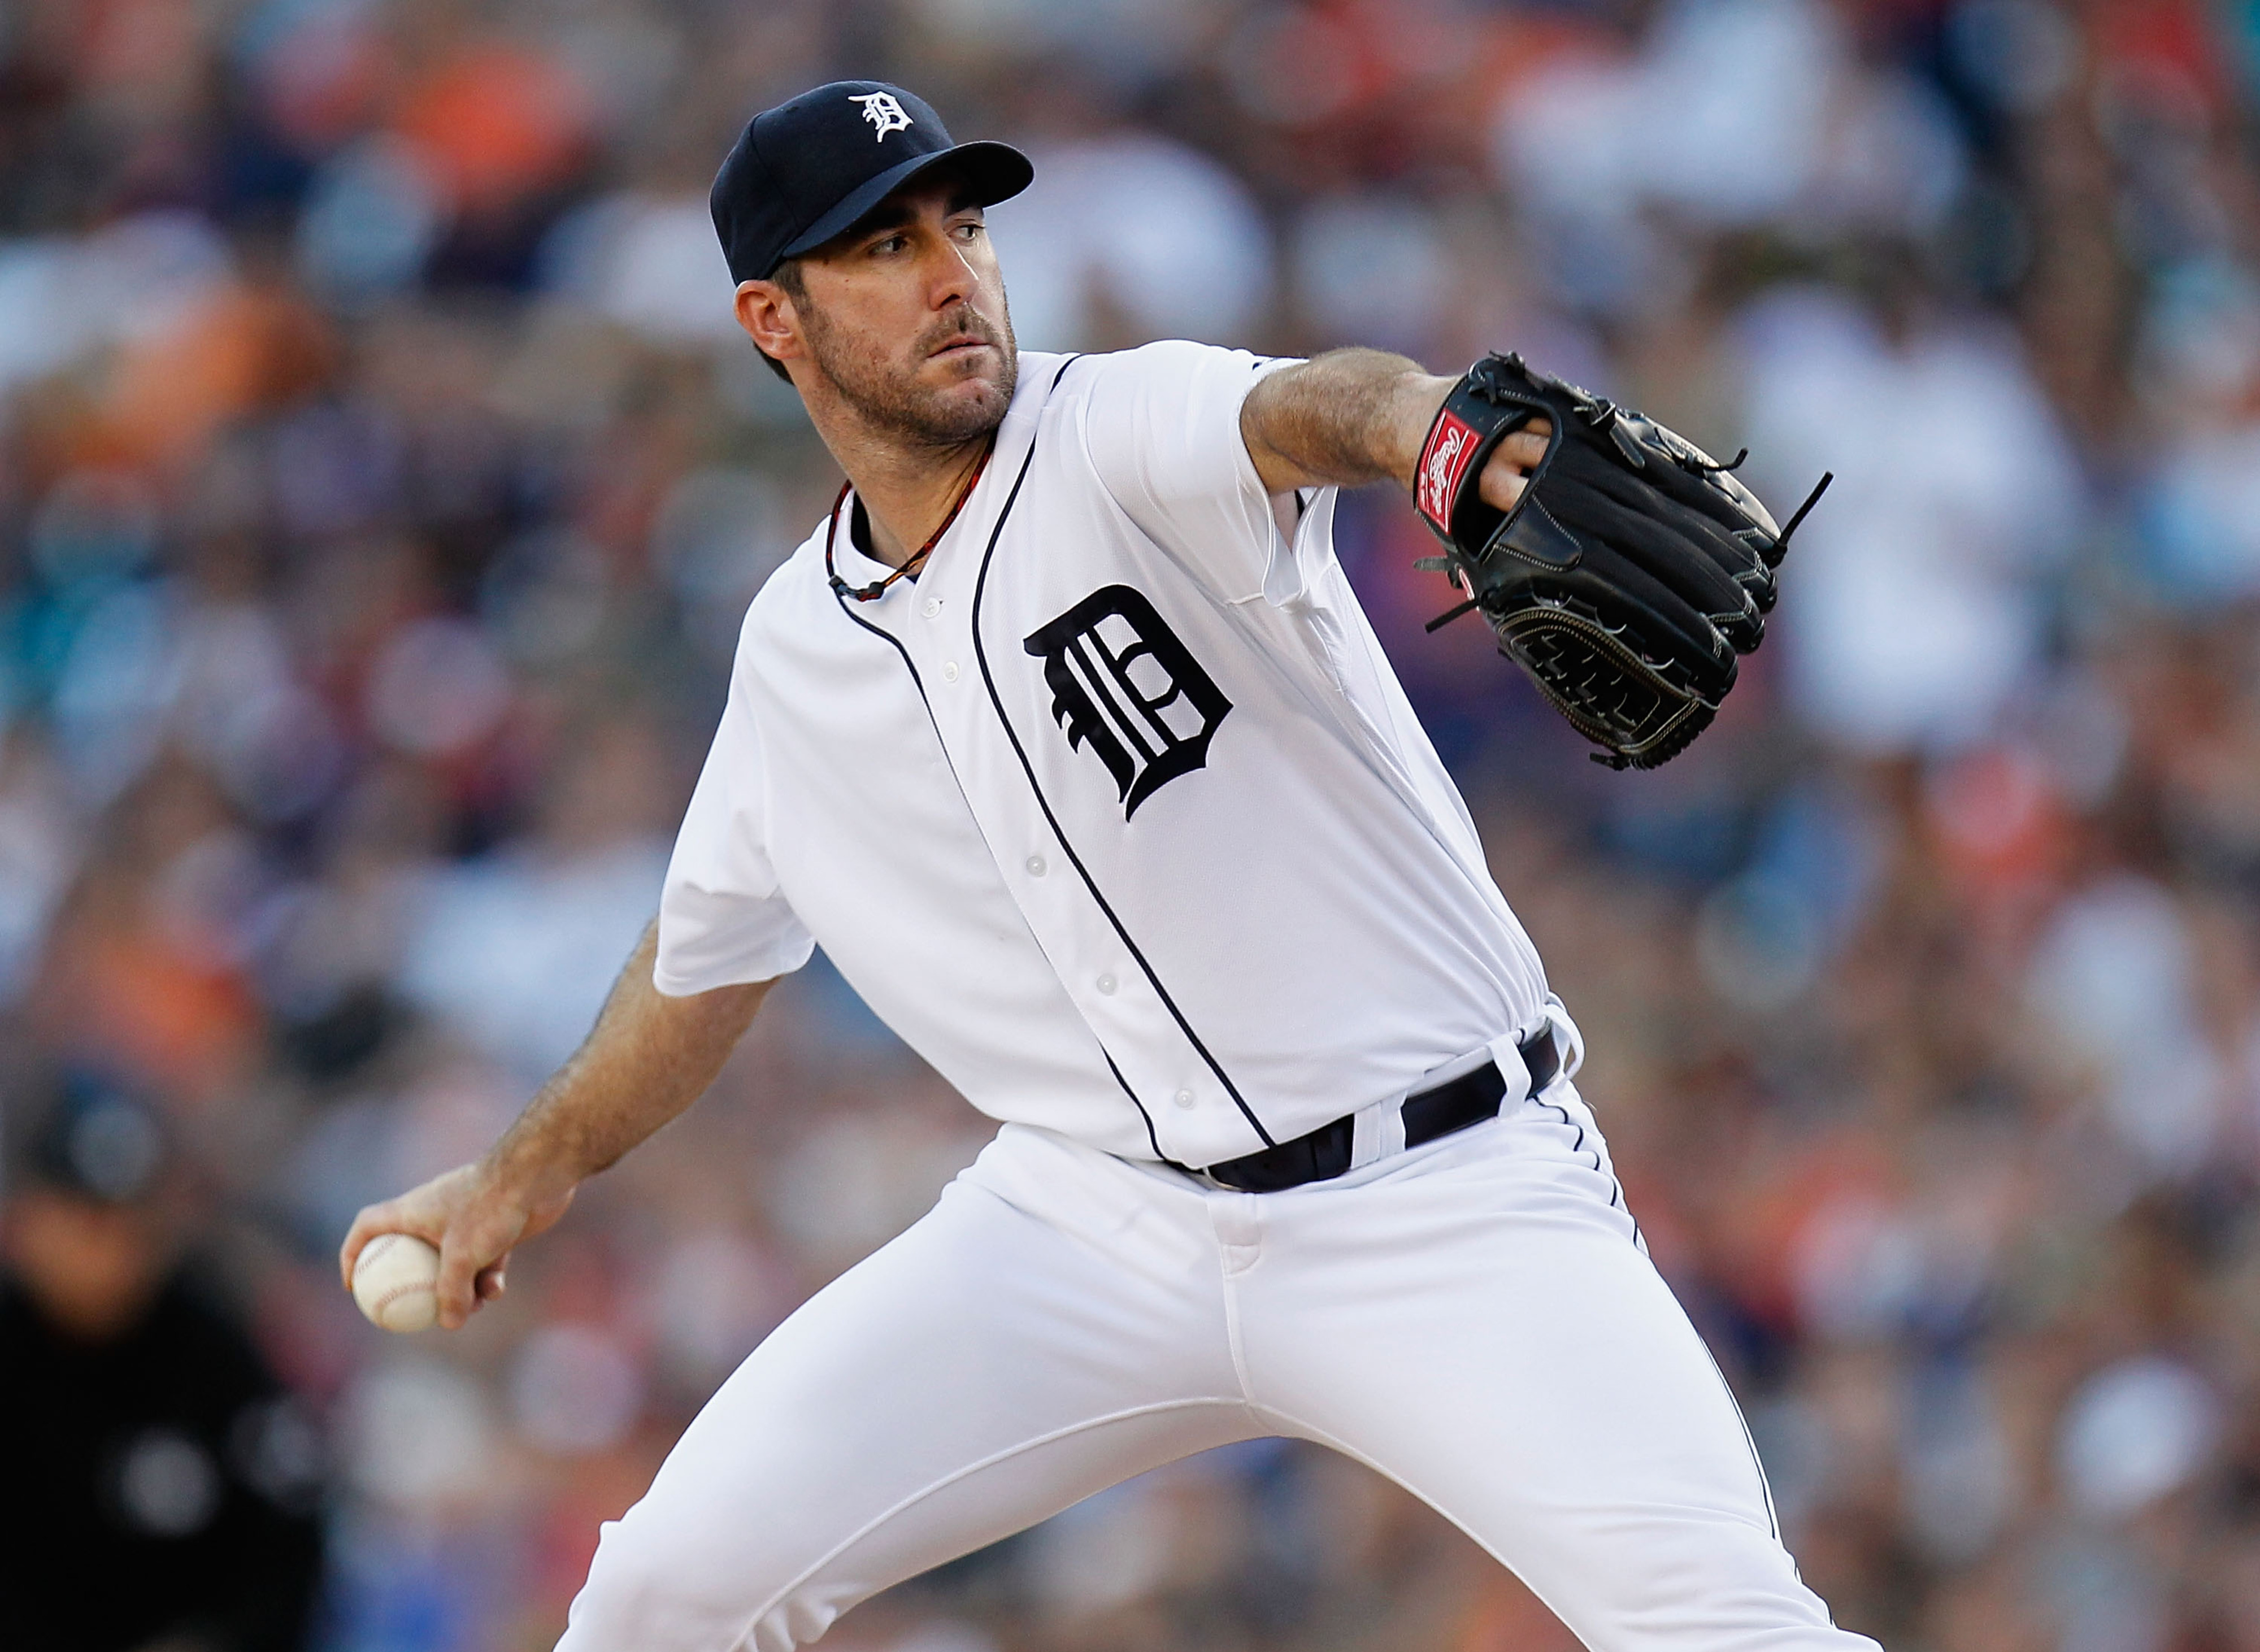 DETROIT, MI - AUGUST 17:  Justin Verlander #35 of the Detroit Tigers throws a second-inning pitch while playing the Baltimore Orioles at Comerica Park on August 17, 2012 in Detroit, Michigan.  (Photo by Gregory Shamus/Getty Images)